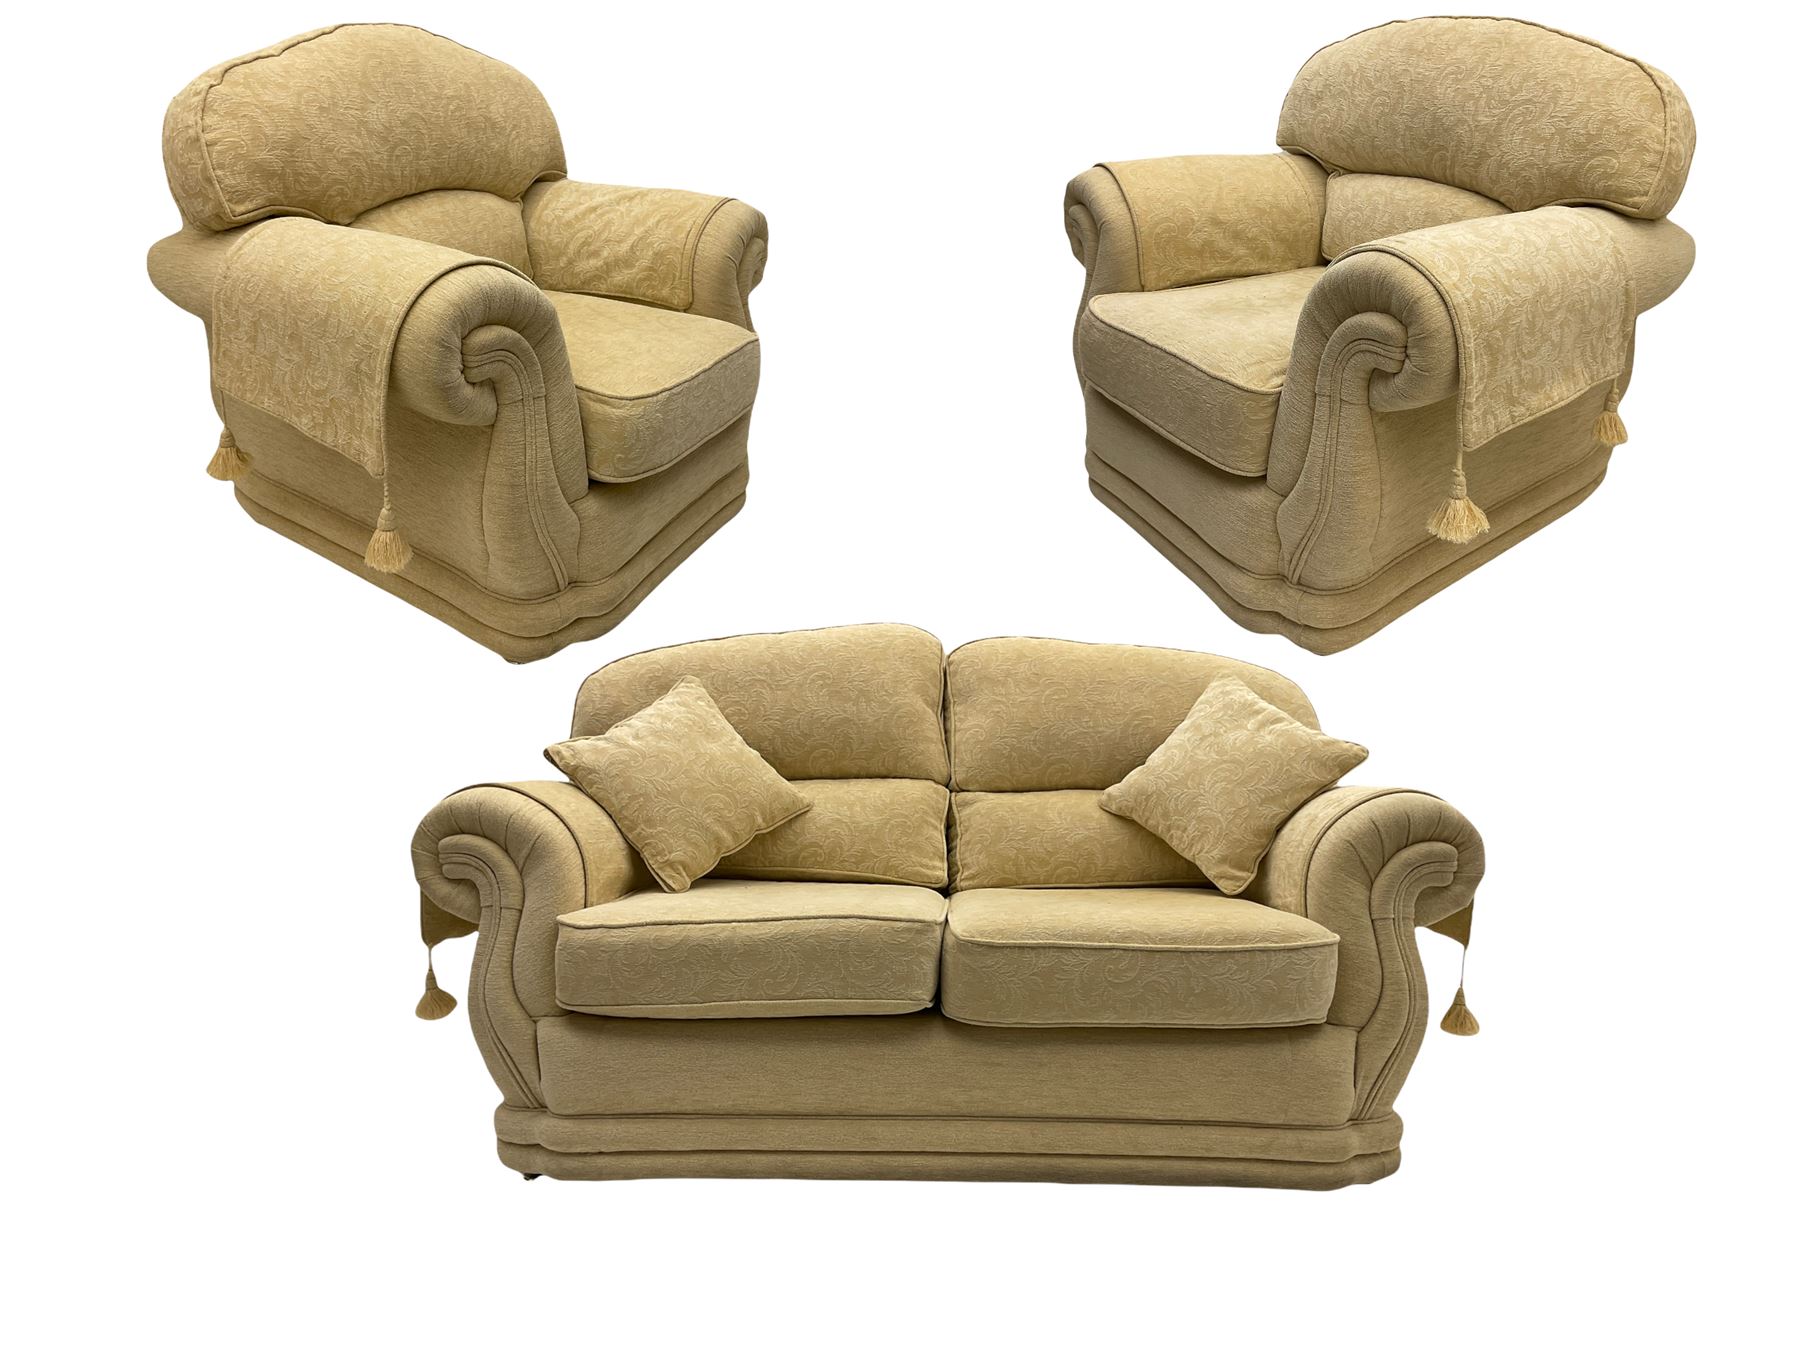 Three piece lounge suite upholstered in beige plain and embossed fabric